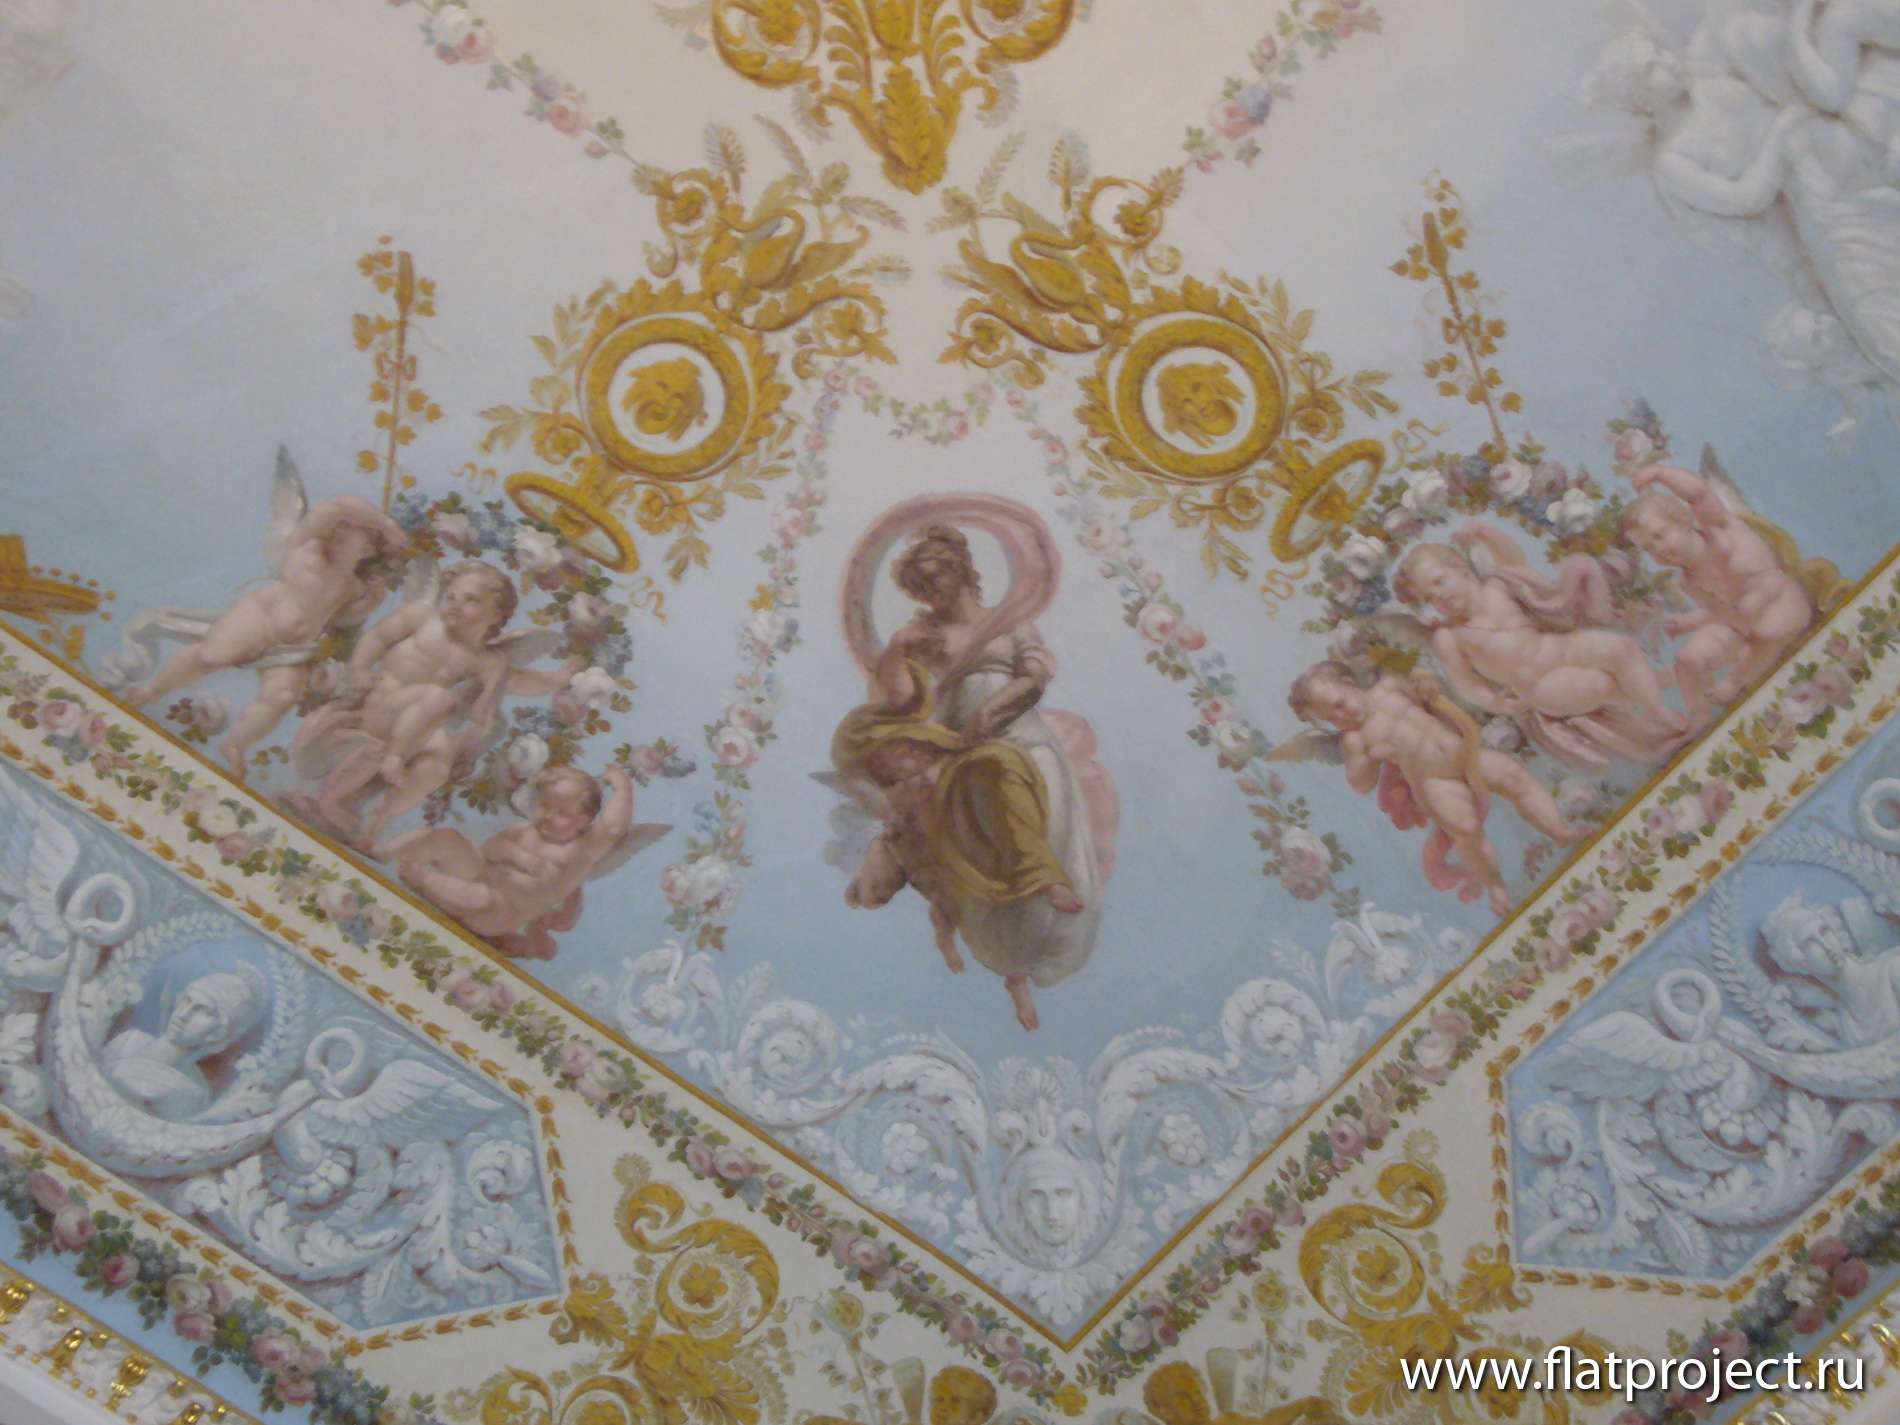 The State Russian museum interiors – photo 74